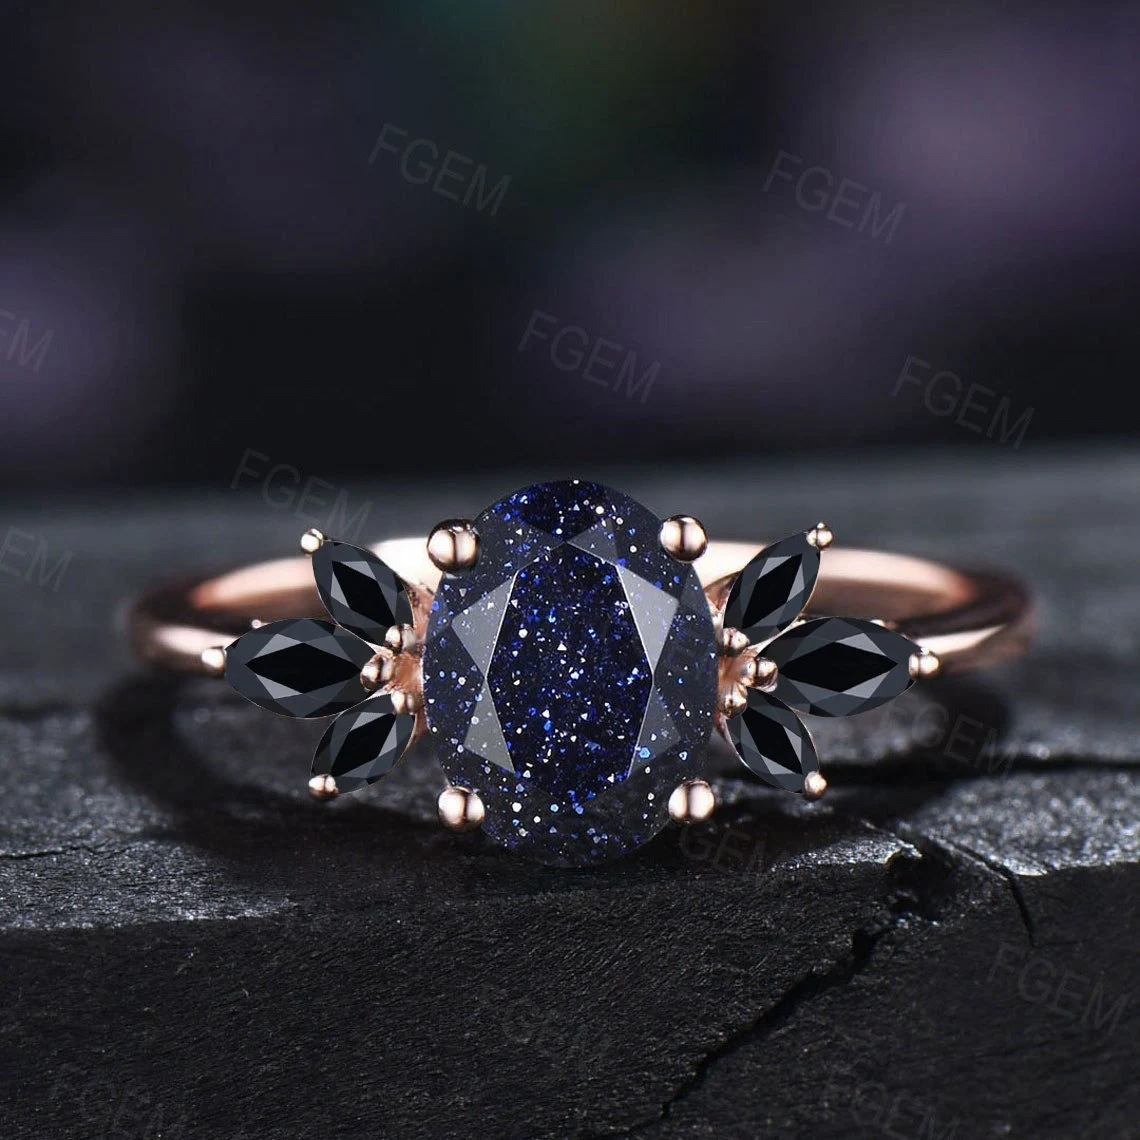 Something Blue Engagement Rings! 13 Most Beautiful Blue-Hued Gemstone Rings  For A Romantic Proposal - Praise Wedding